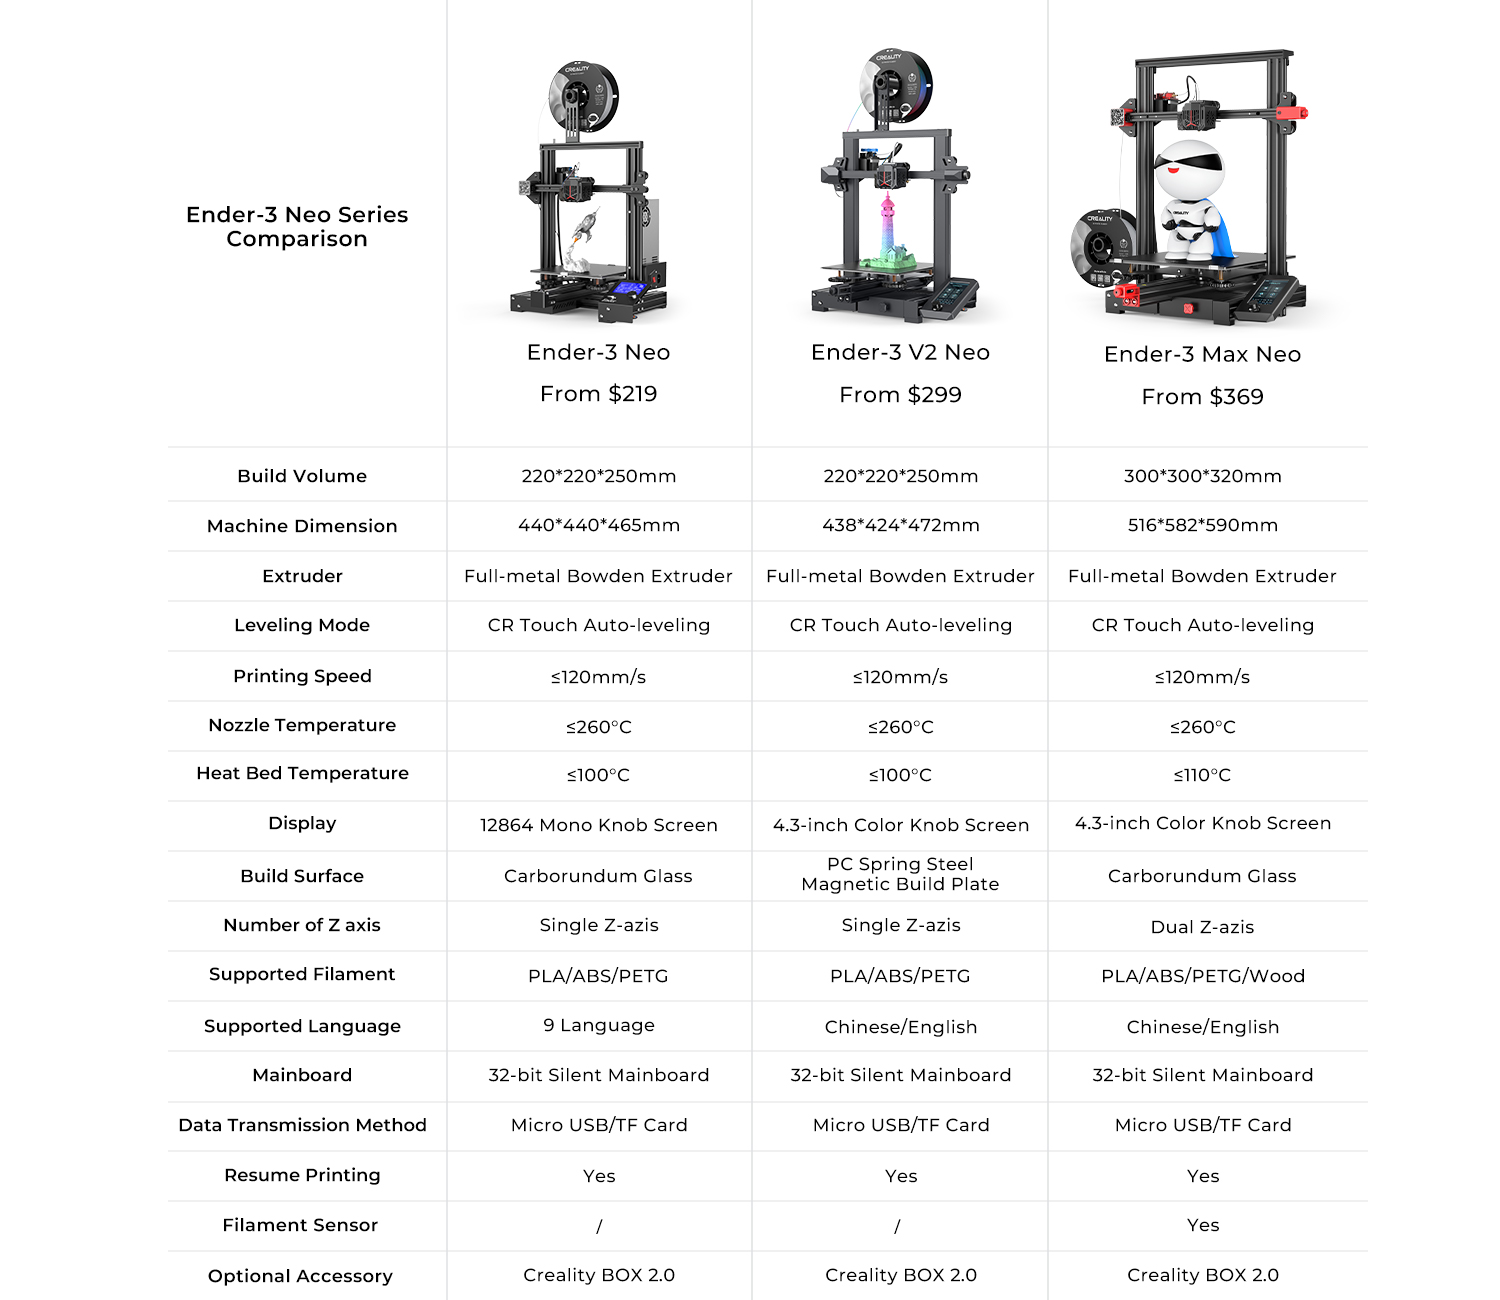 Ender 3 Neo Series Comparison | Ender-3 Neo, Ender-3 V2 Neo, and Ender-3 Max Neo, which is the right one for you?